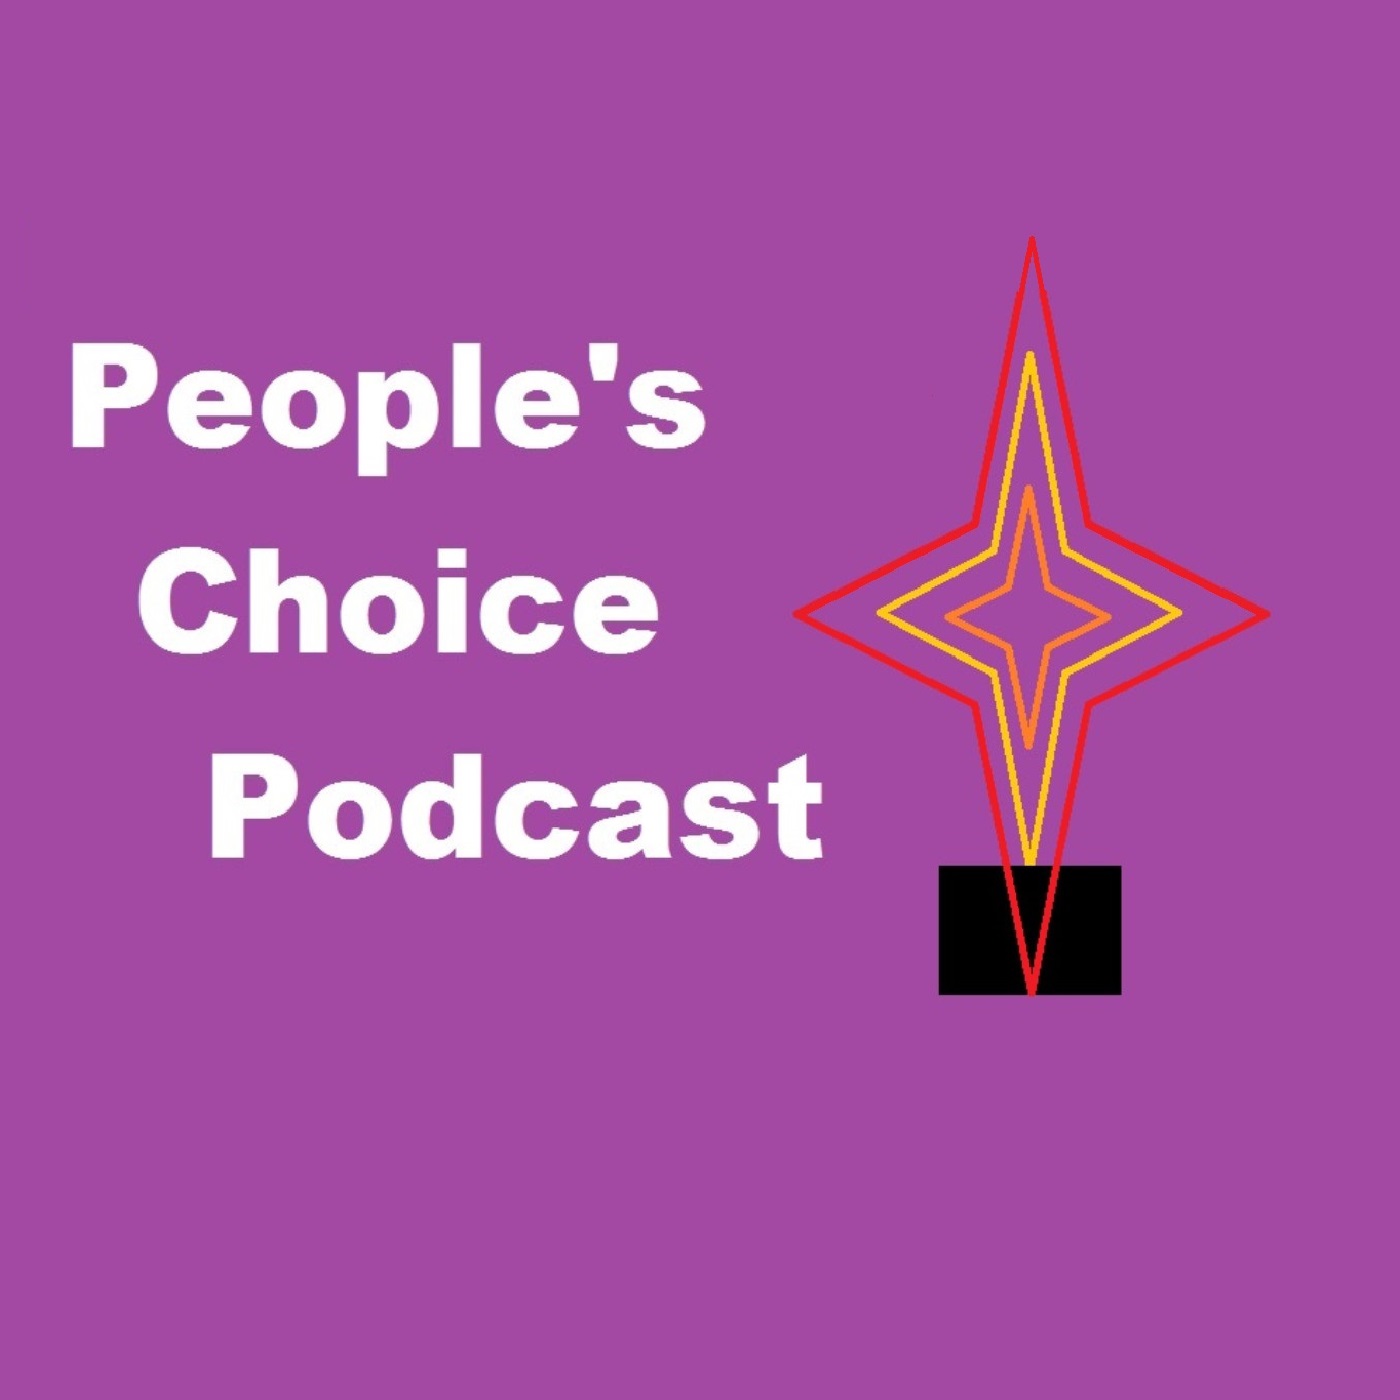 People's Choice Podcast